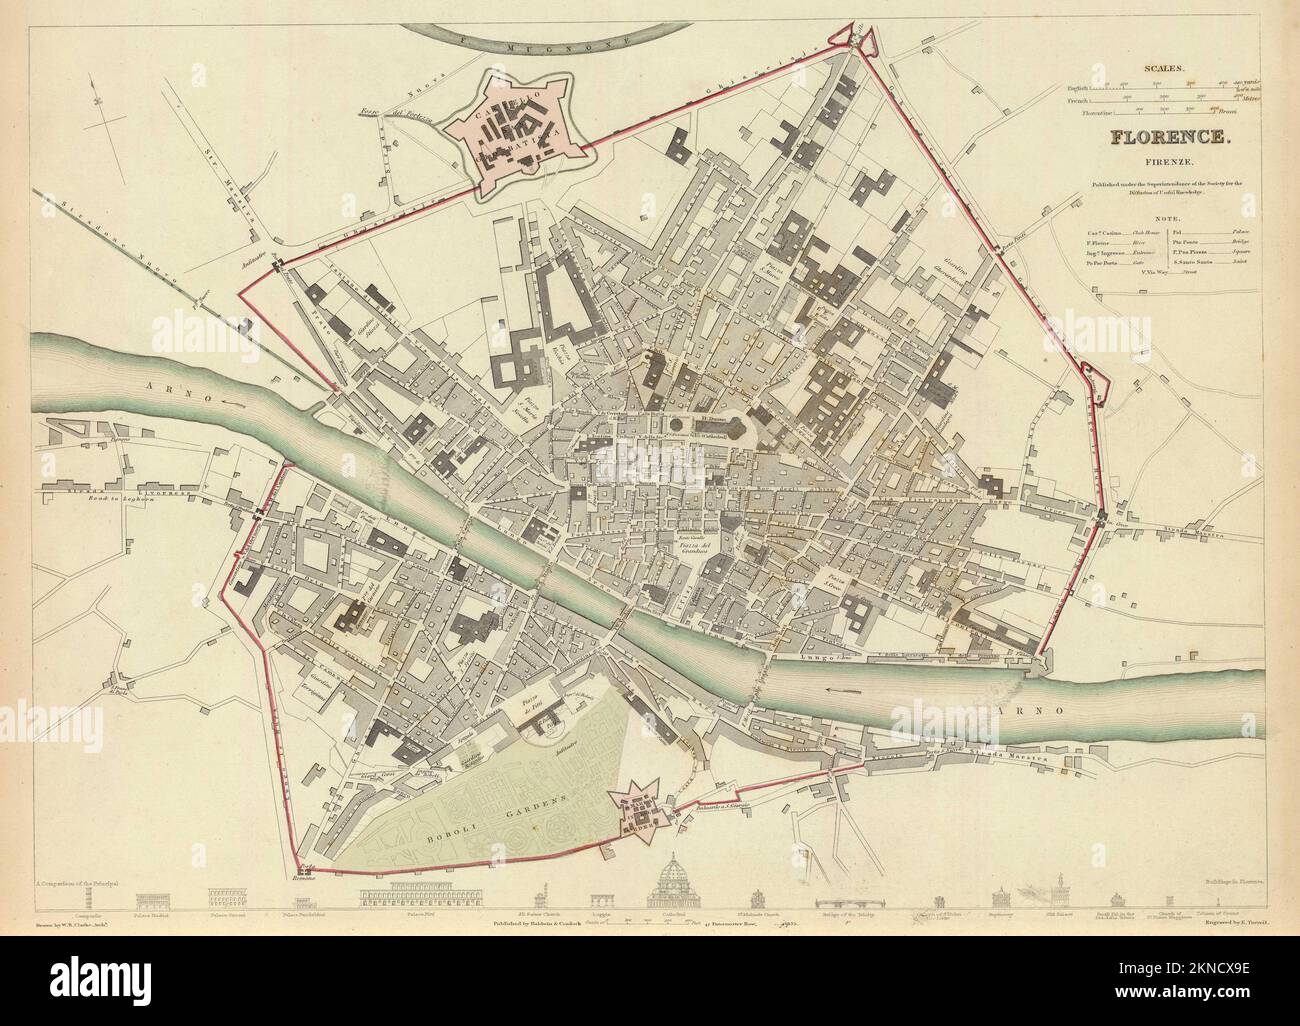 Vintage city plan of Florence and area around it from 16th-18th century. Maps are beautifully hand illustrated and engraved showing it at the time. Stock Photo